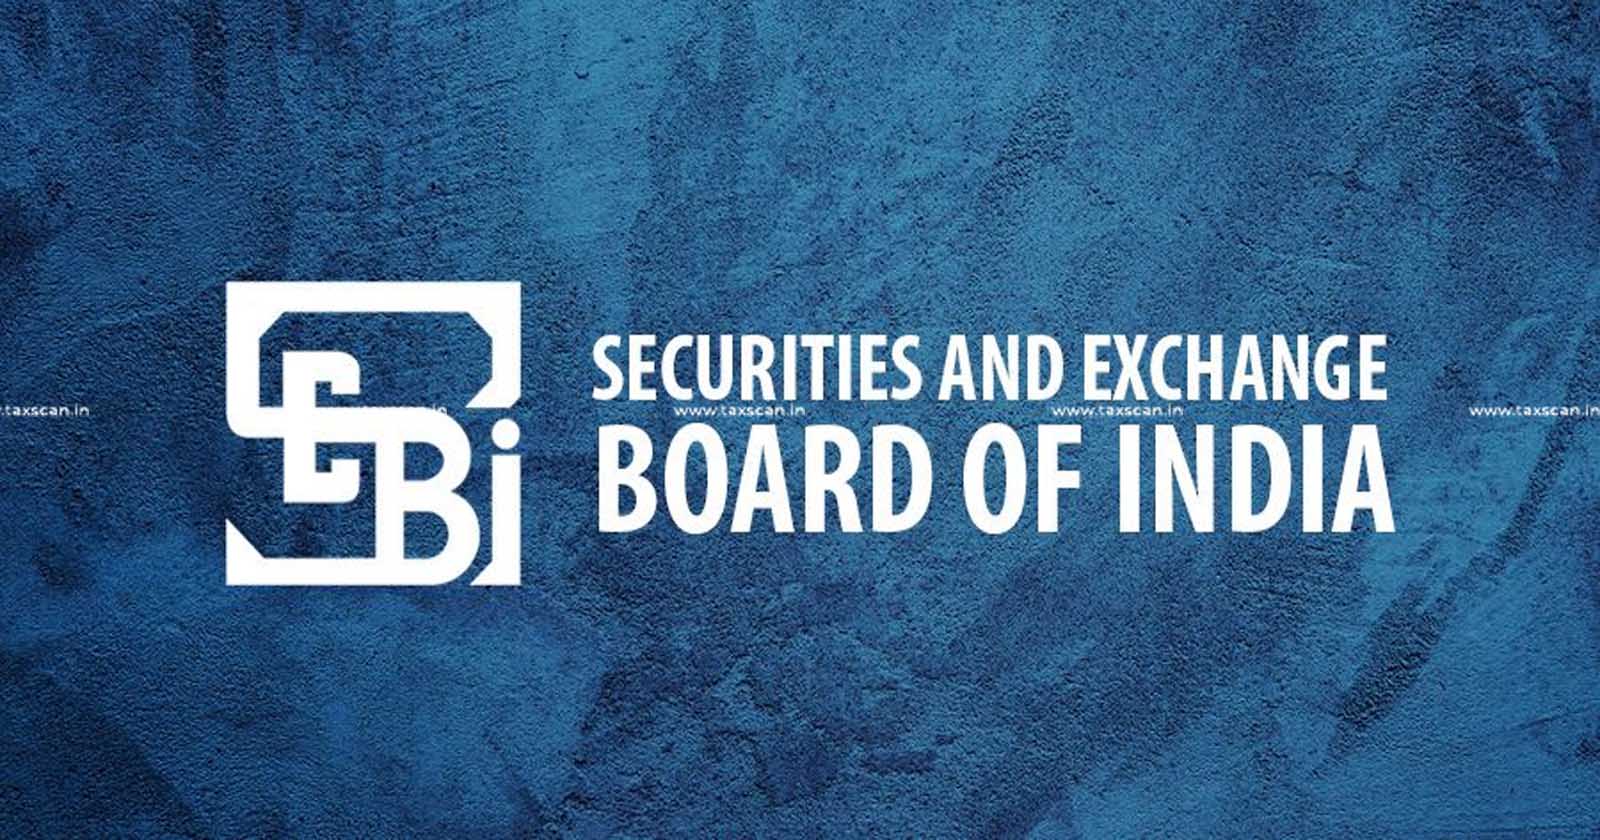 Alternative Investment Funds - Investment - Investment Funds - Dematerialized Form - SEBI - SEBI Notifies Amended Regulations - taxscan